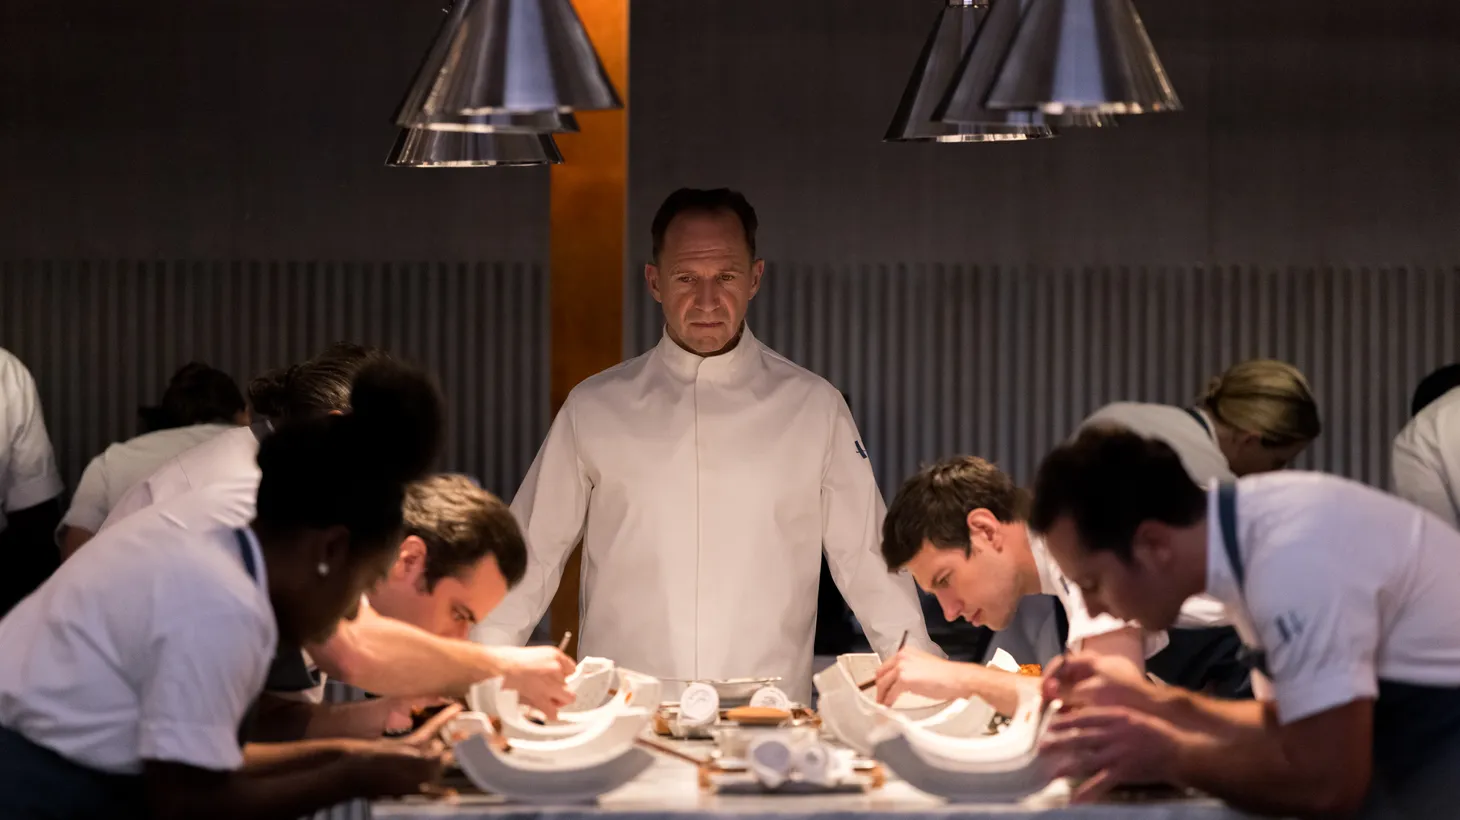 "We wrote this stupid thing so that we can get free food and I don't think it's going to happen," jest screenwriters Seth Reiss and Will Tracy. Their film "The Menu," stars Ralph Fiennes (pictured) as a chef who exacts revenge on his well-heeled patrons.